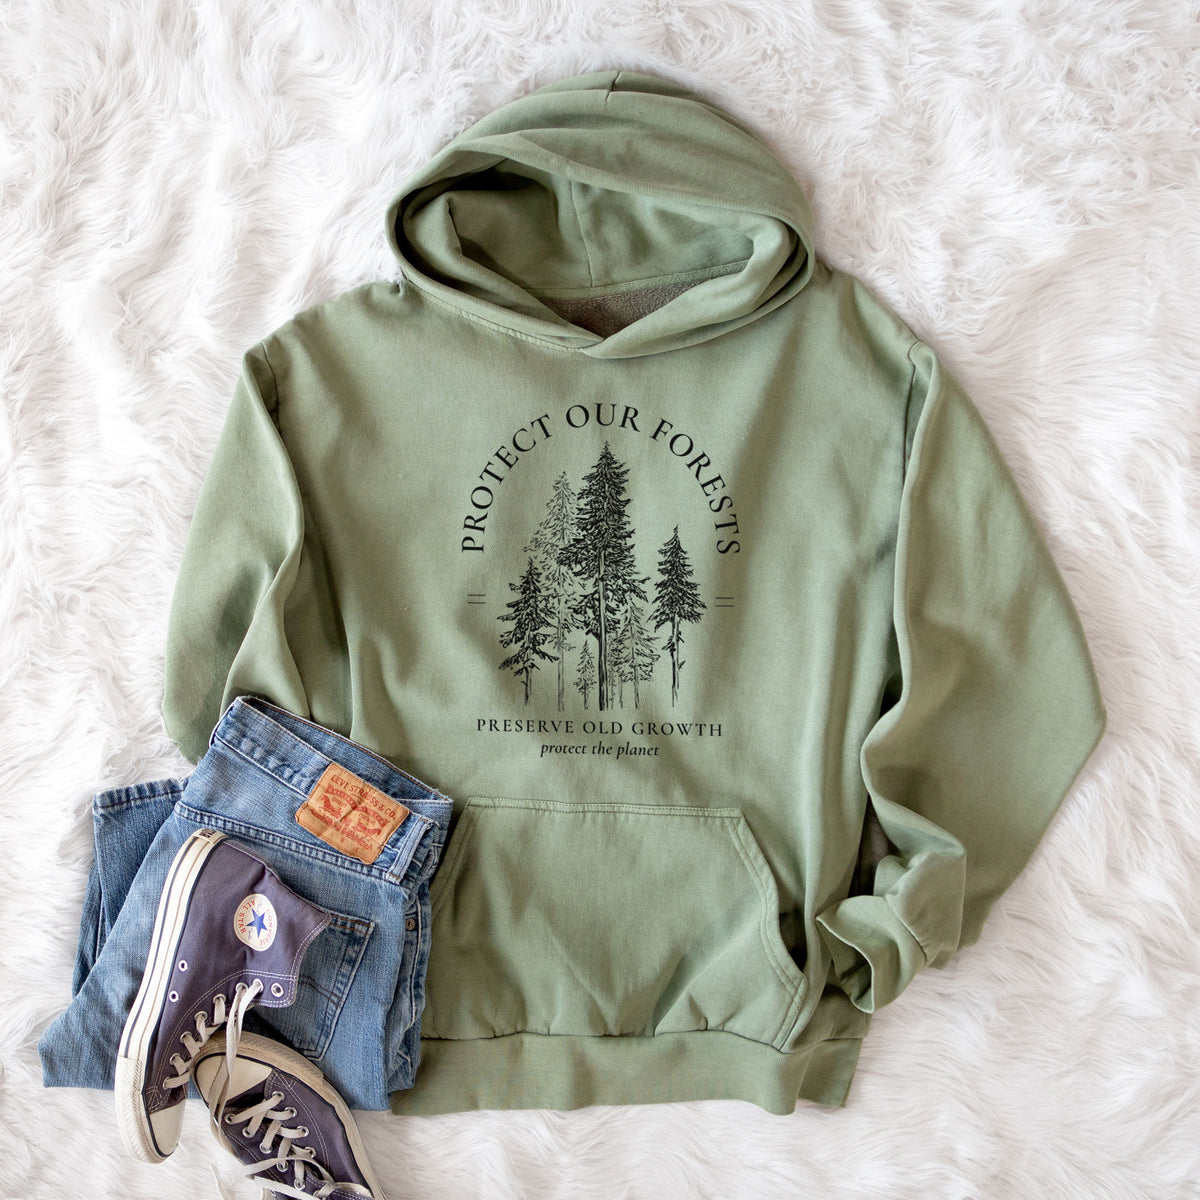 Protect our Forests - Preserve Old Growth  - Urban Heavyweight Hoodie